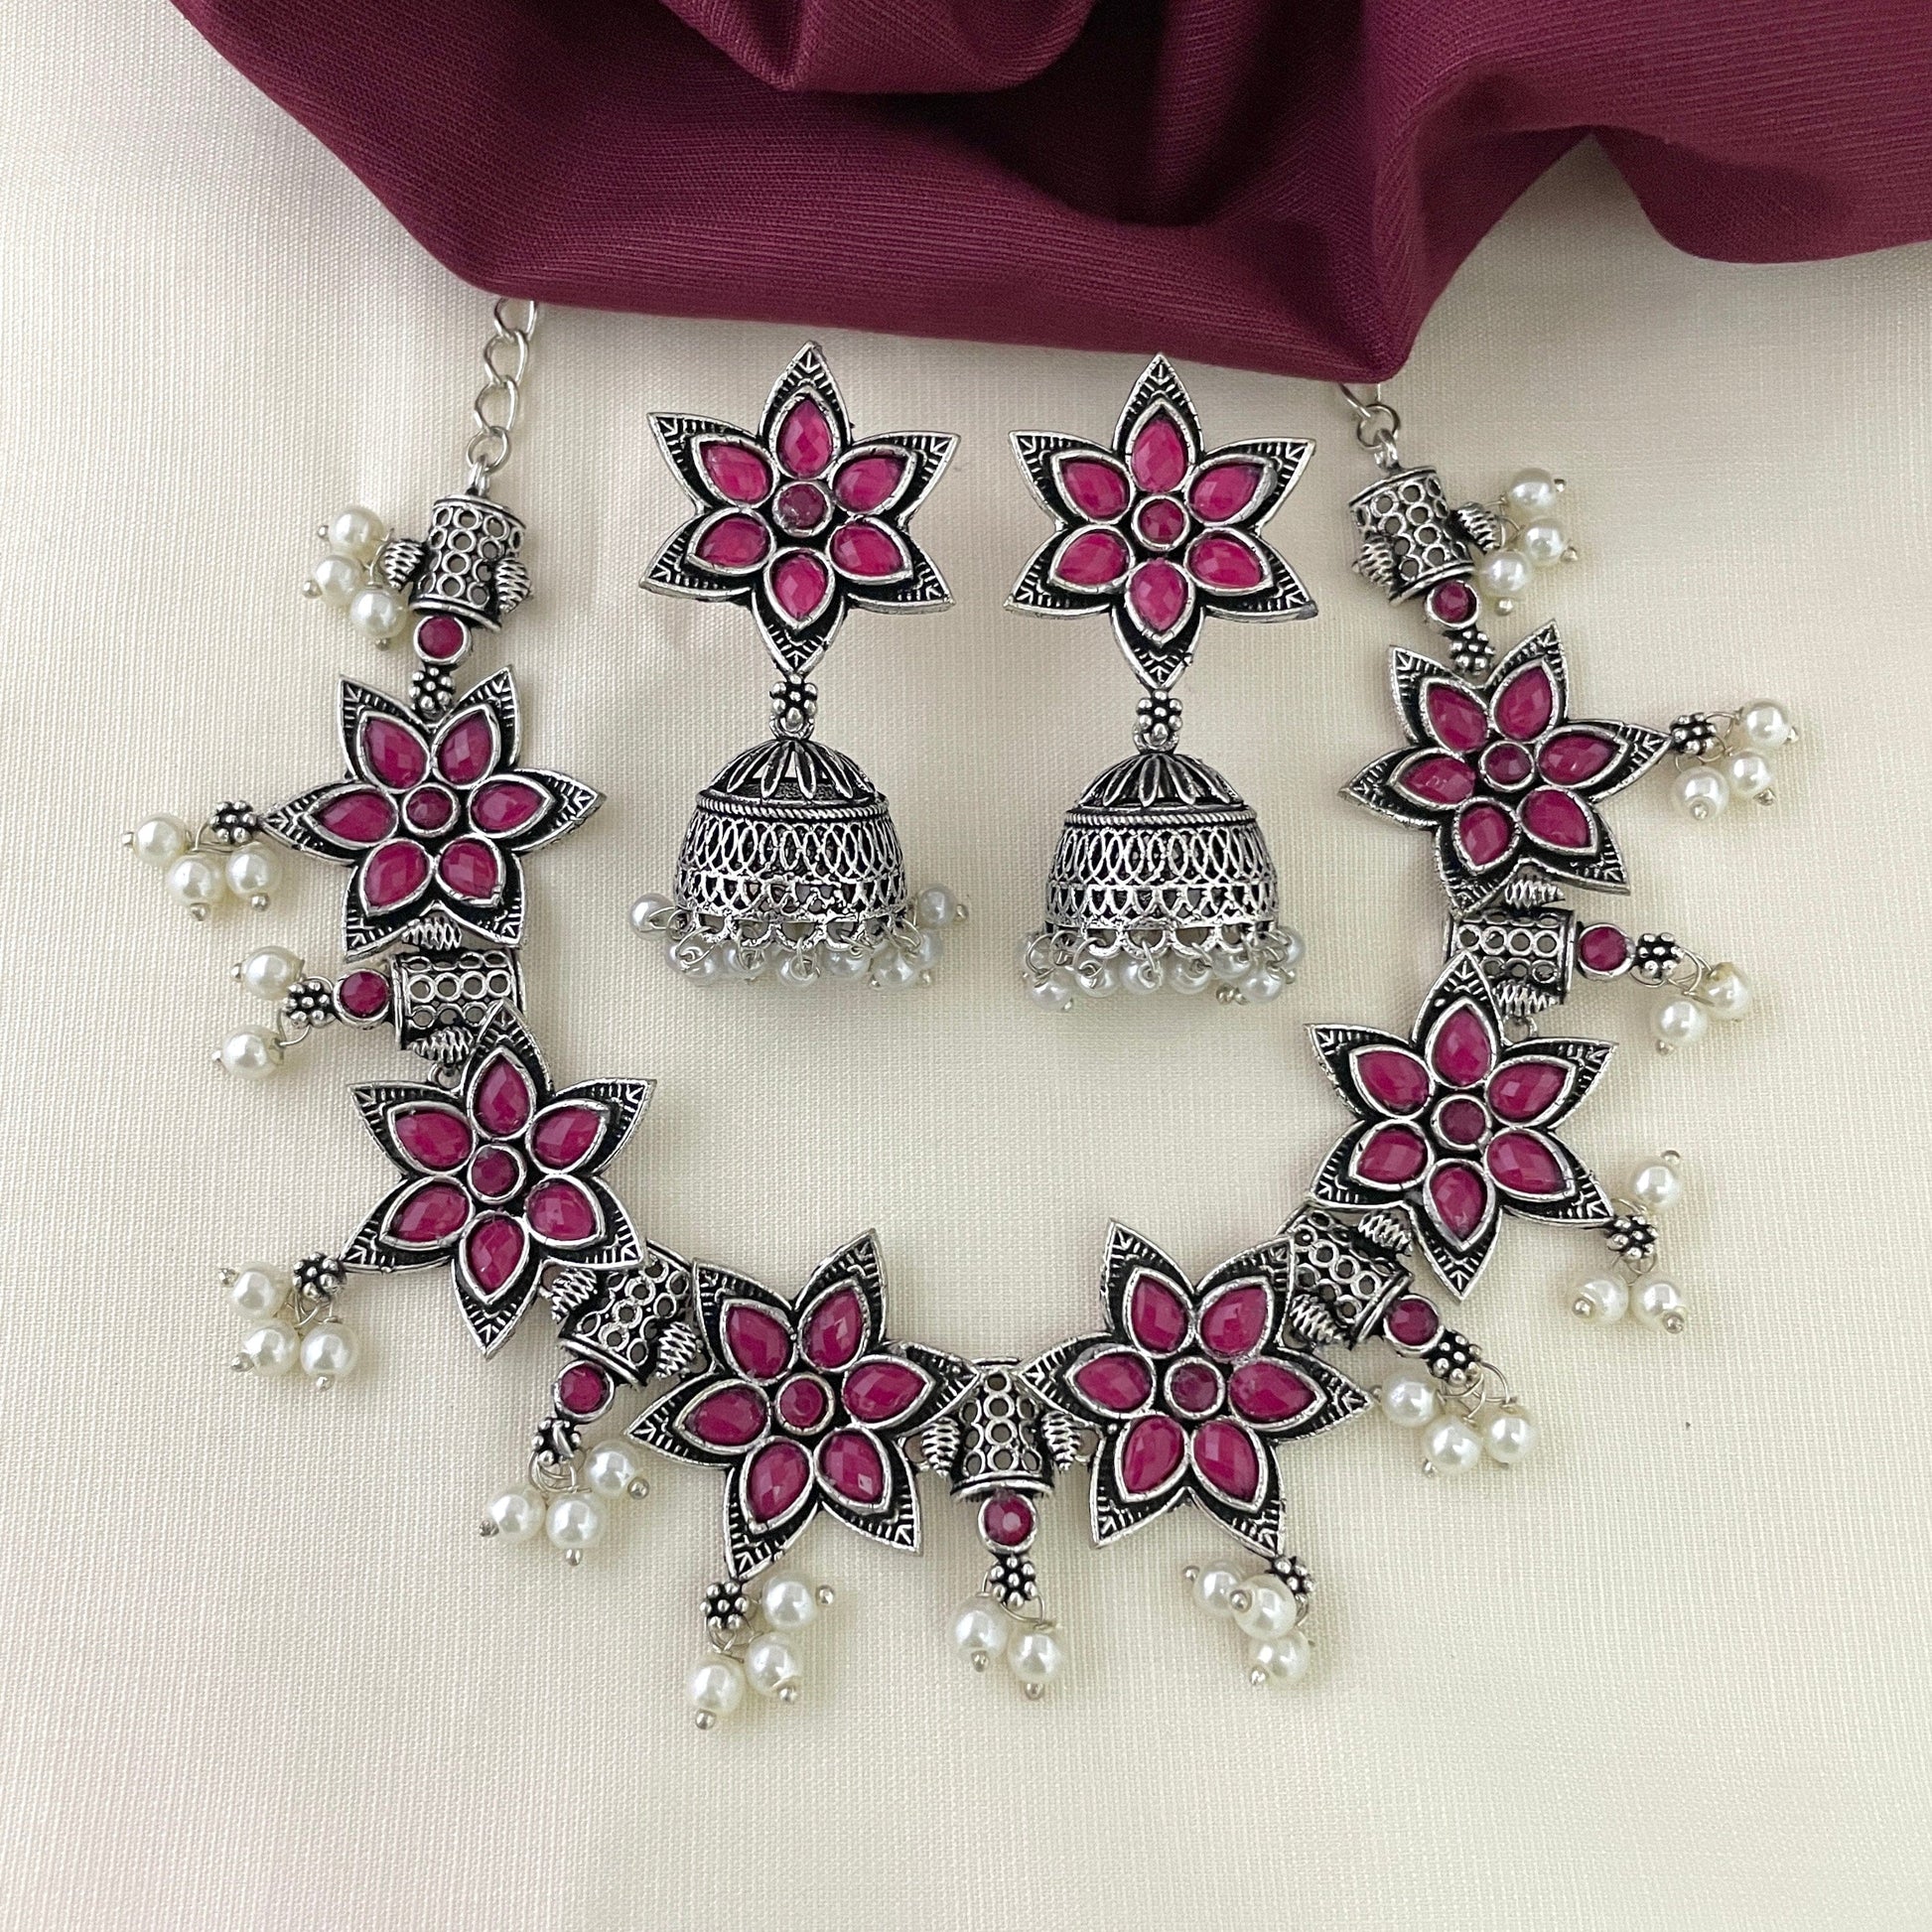 Sparsh "Oxidized Necklace with Ruby Flower Design"